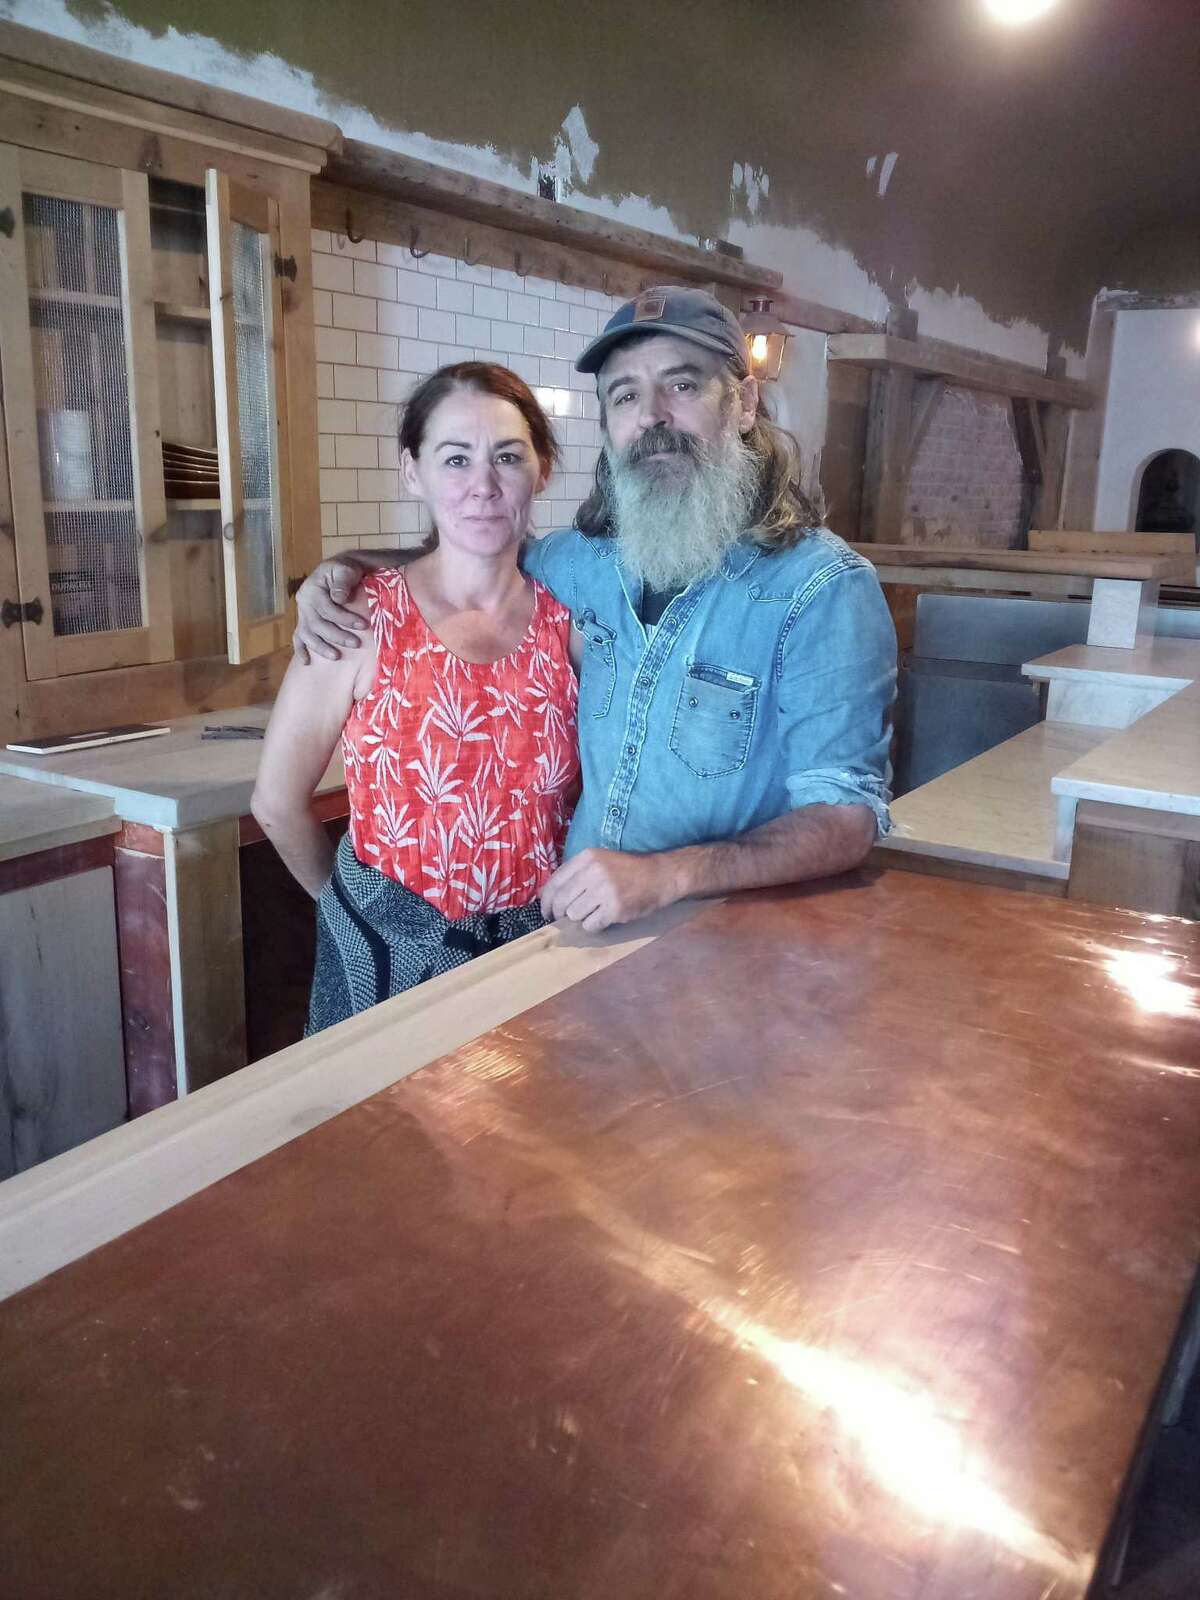 Michelle and Carlo Pulixi of New Hartford plan to open Geppetto Osteria, an Italian steakhouse and bar, at 26 E. Main St., the former site of O’Connor’s Public House.